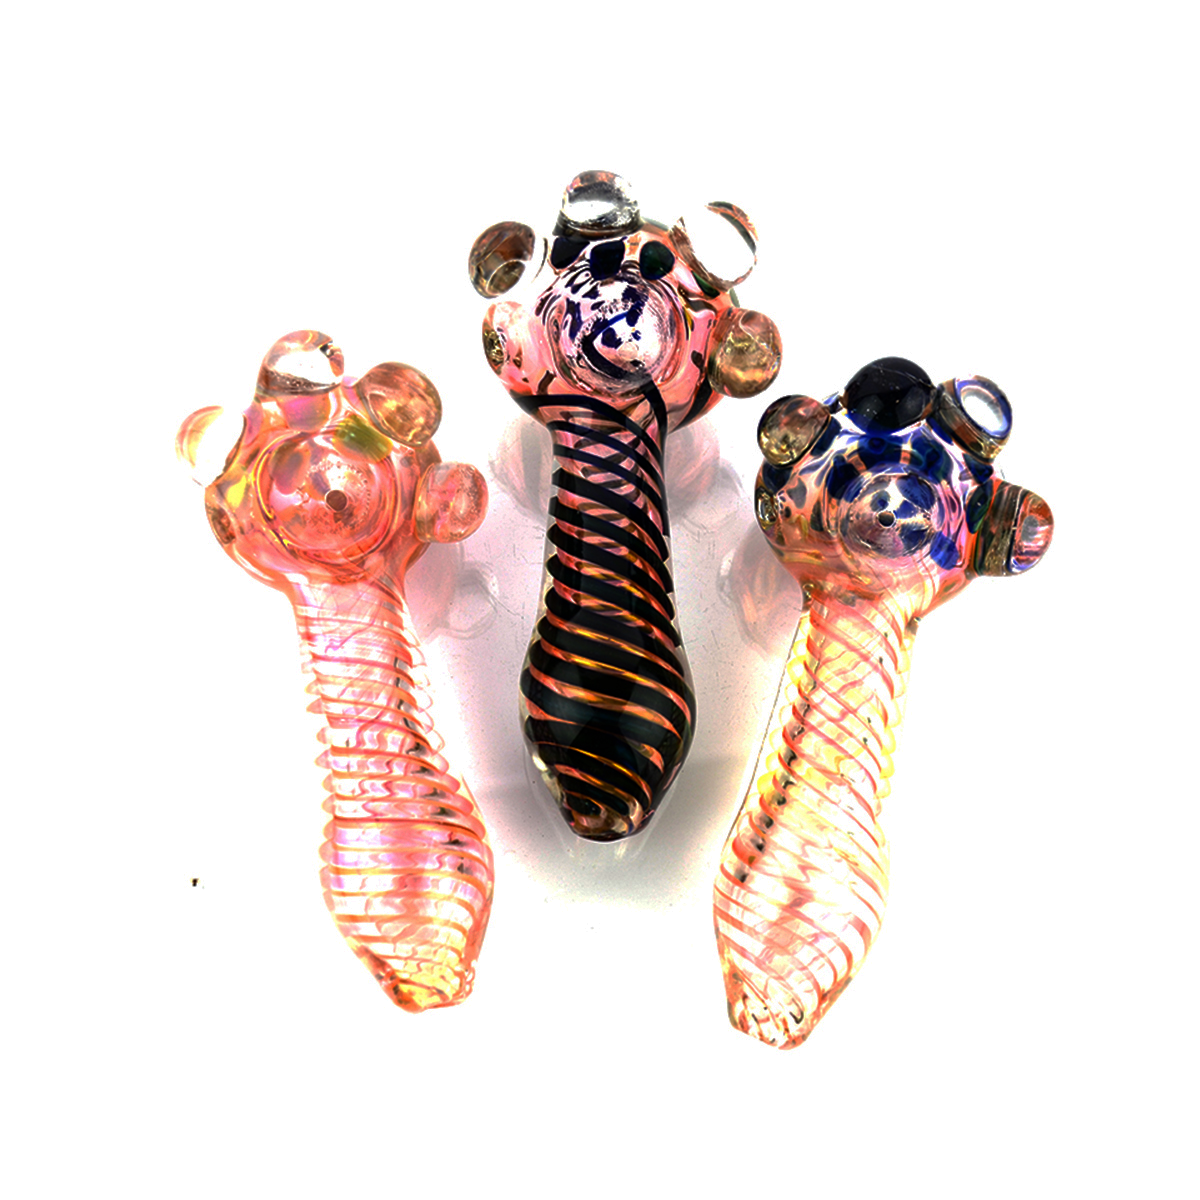 5'' Gold Fume Hand PIPE With Swirling Art and Flower Head Design 200G